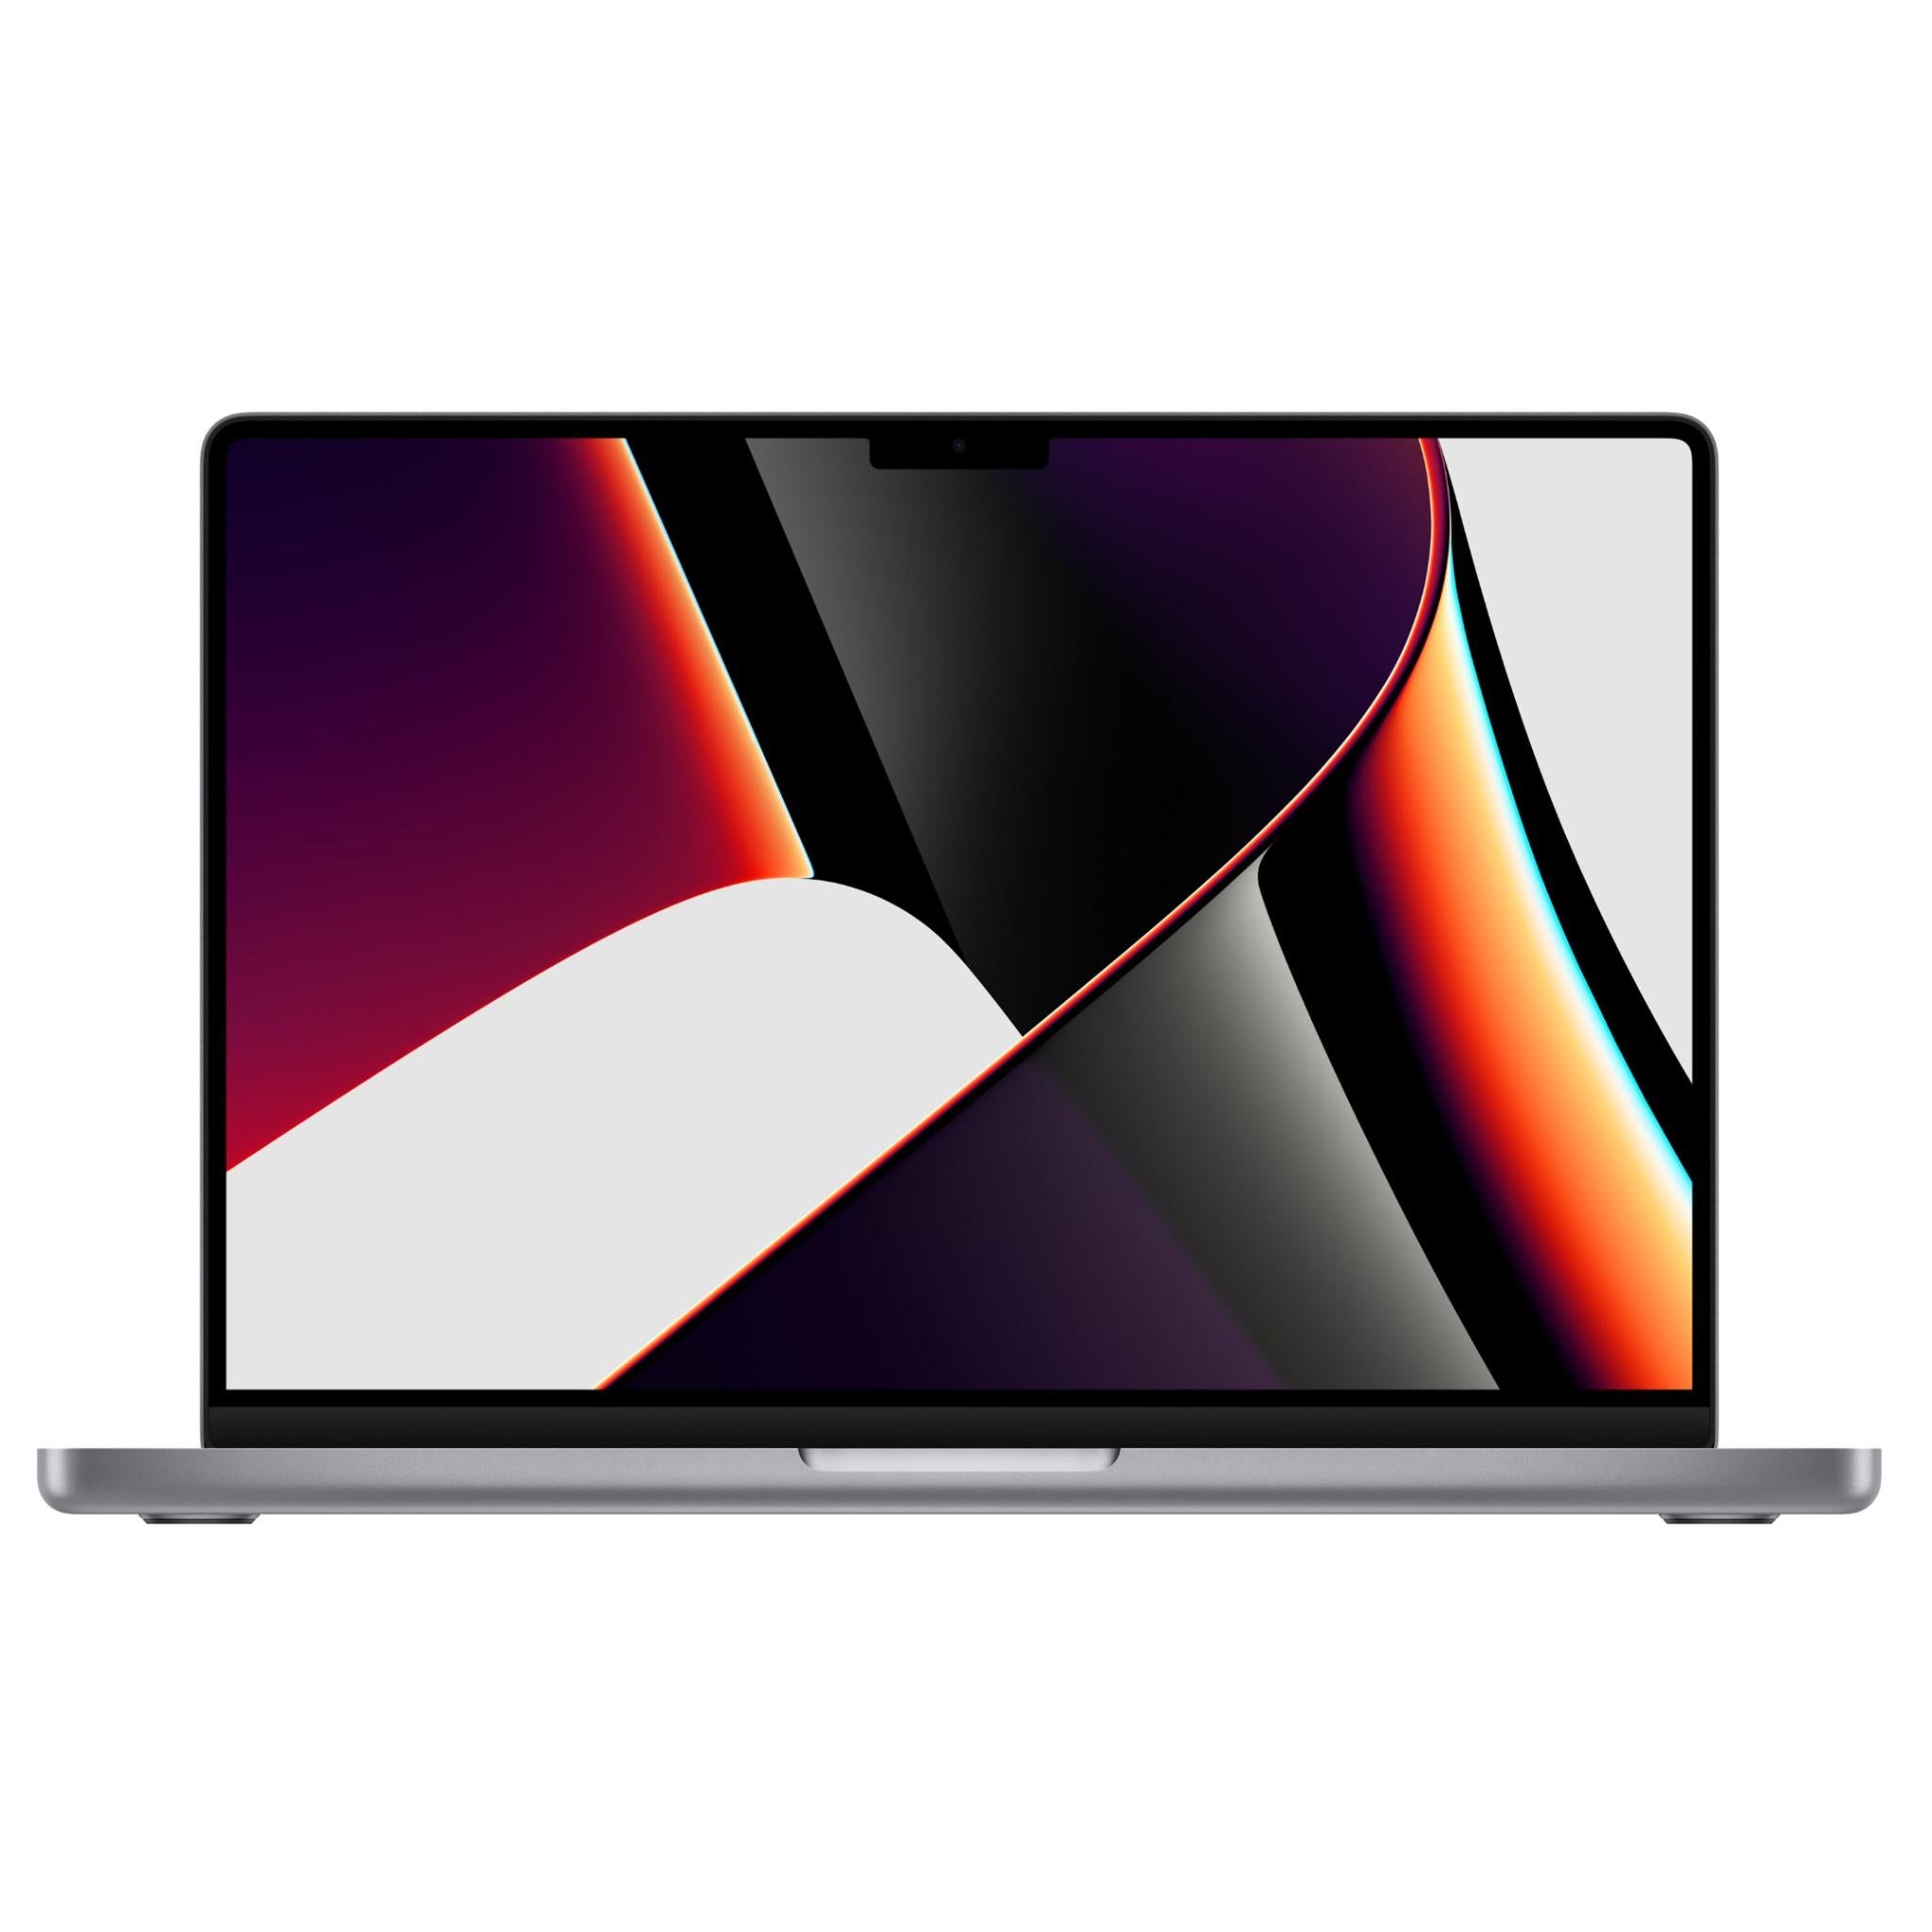 apple macbook pro 14-inch with m1 pro chip 1tb ssd (space grey/2021) [^refurbished]